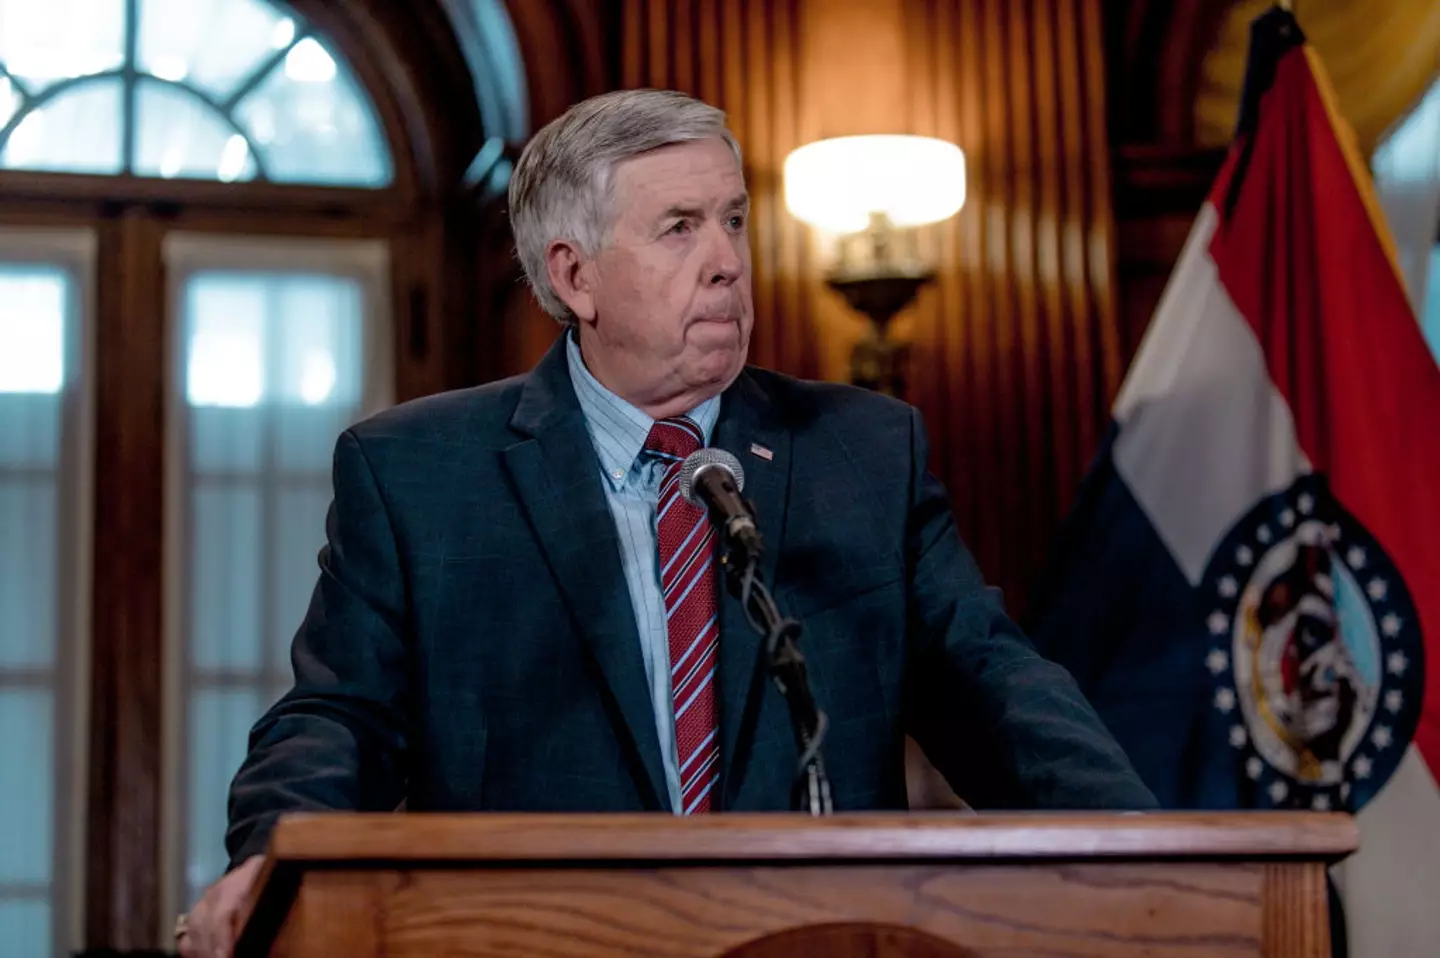 Missouri Governor Mike Parson rejected calls for clemency. (Jacob Moscovitch/Getty Images)